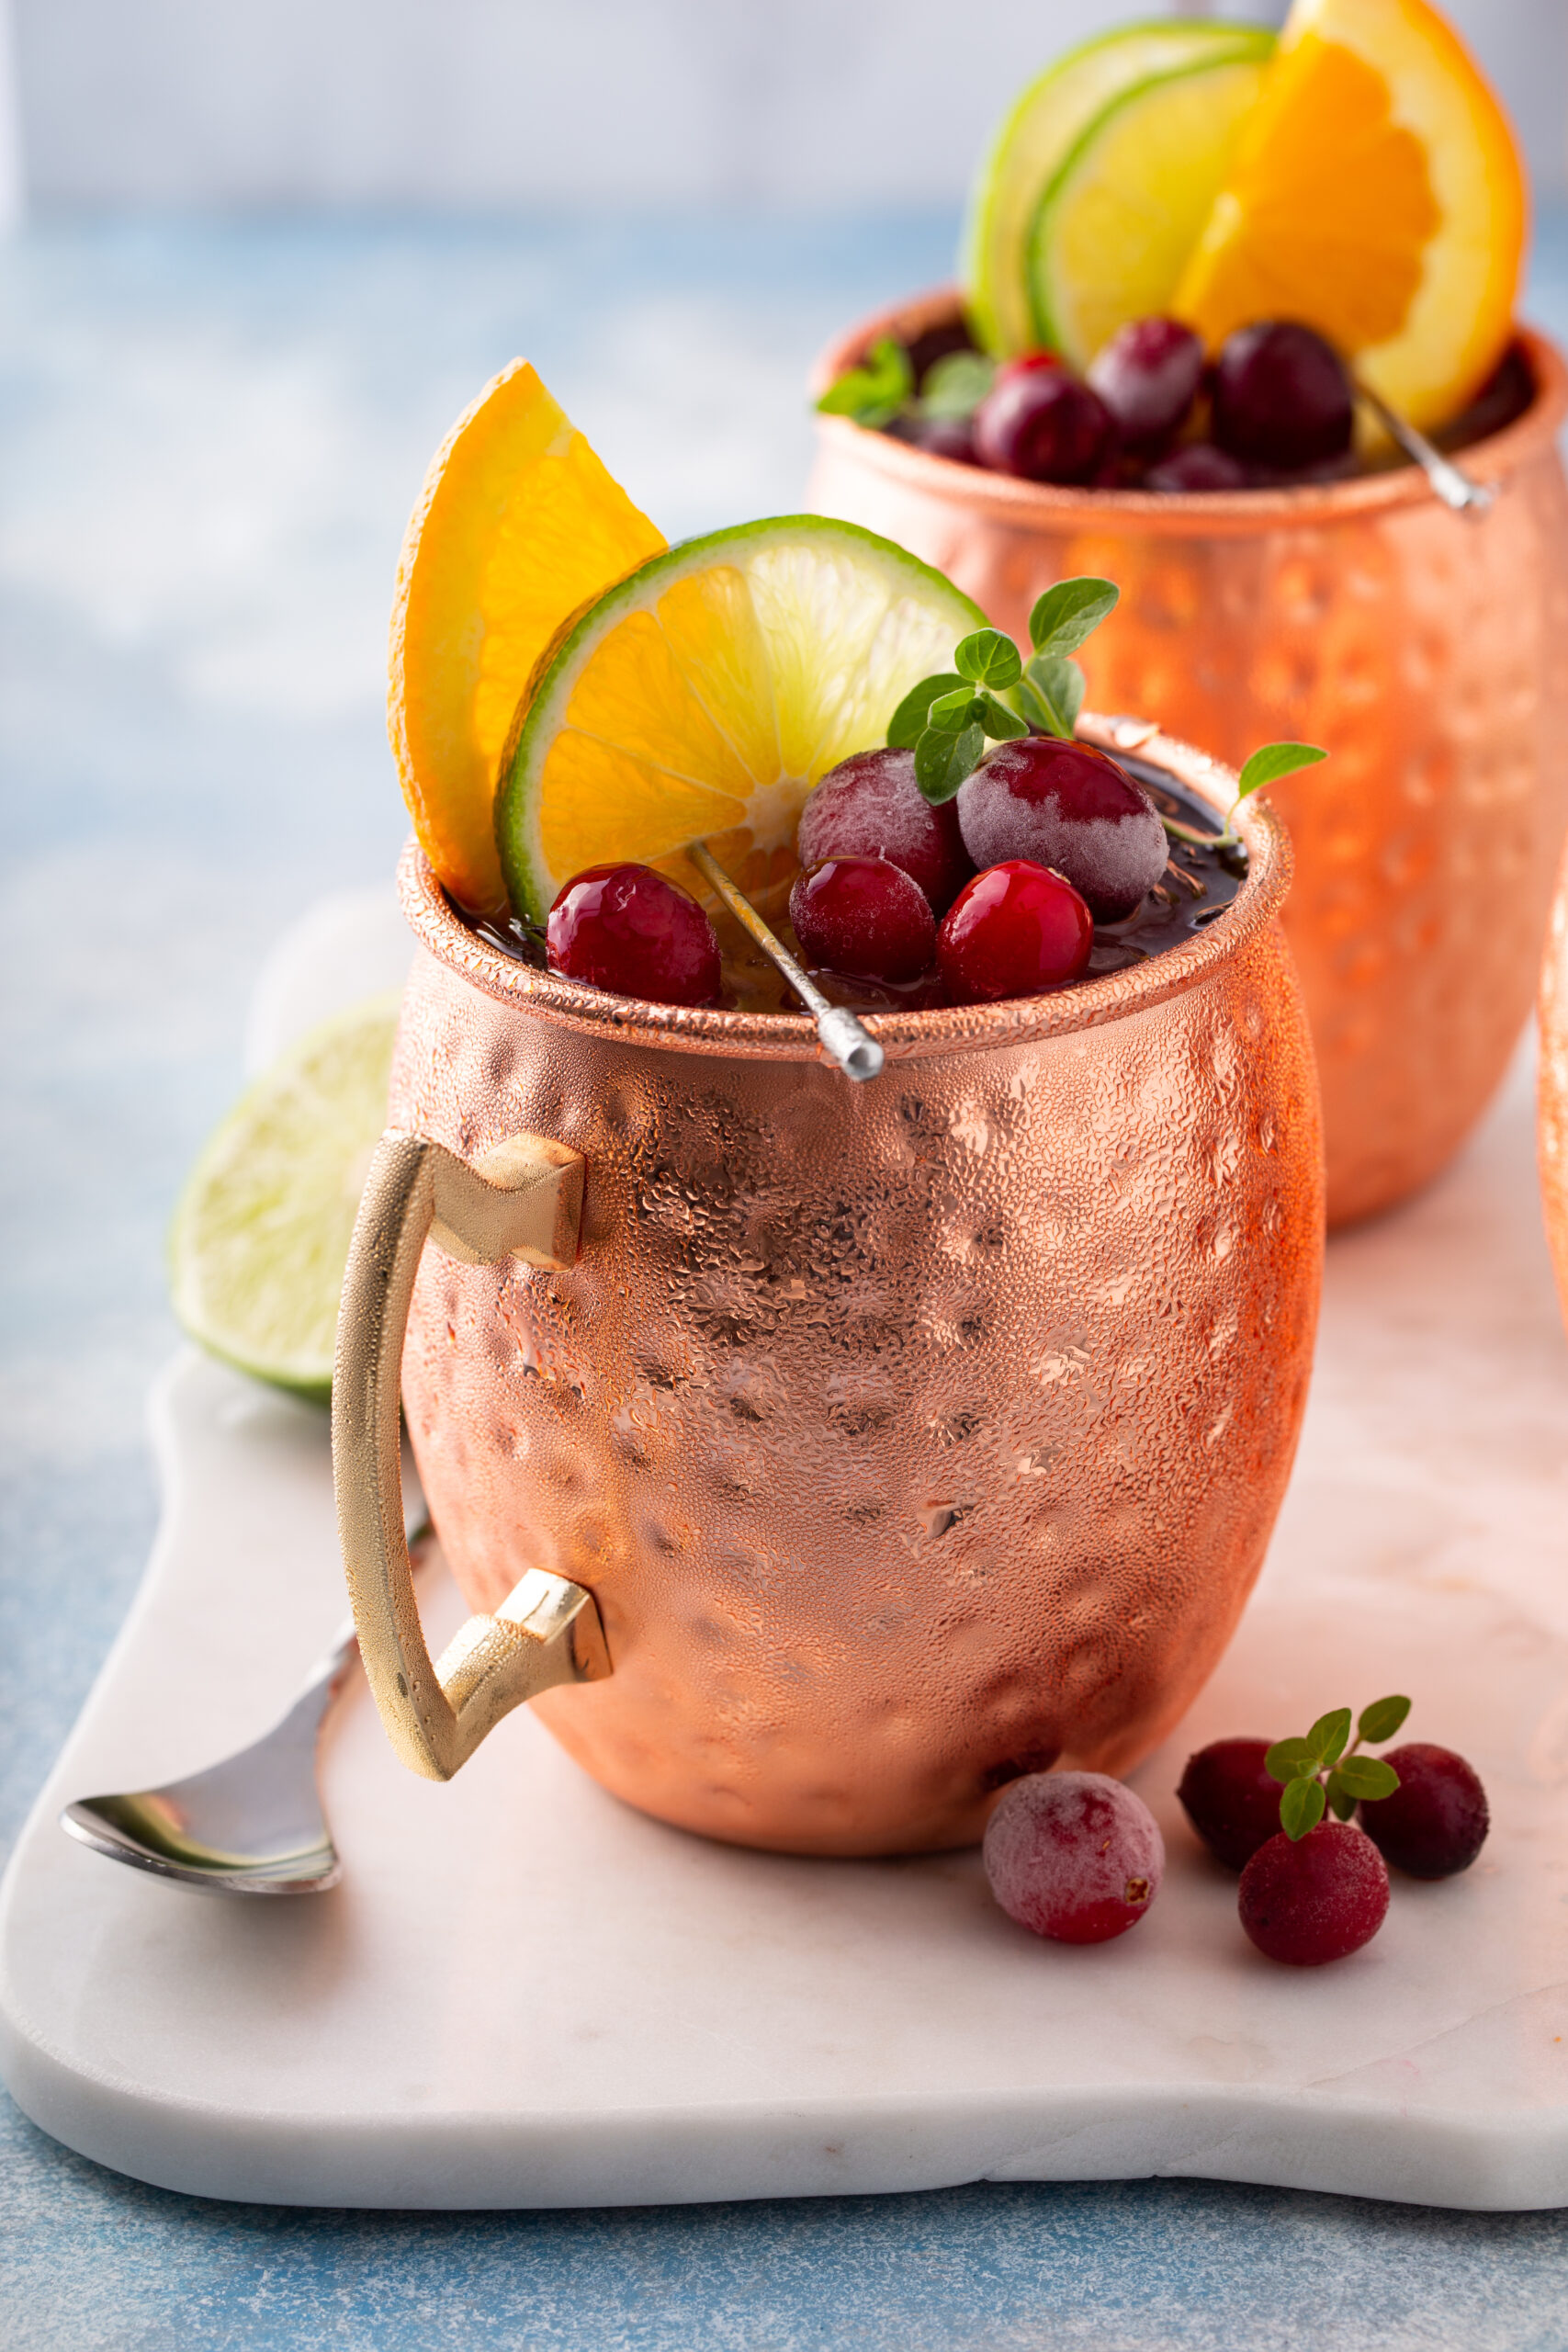 Moscow Mule - Our Best Bites